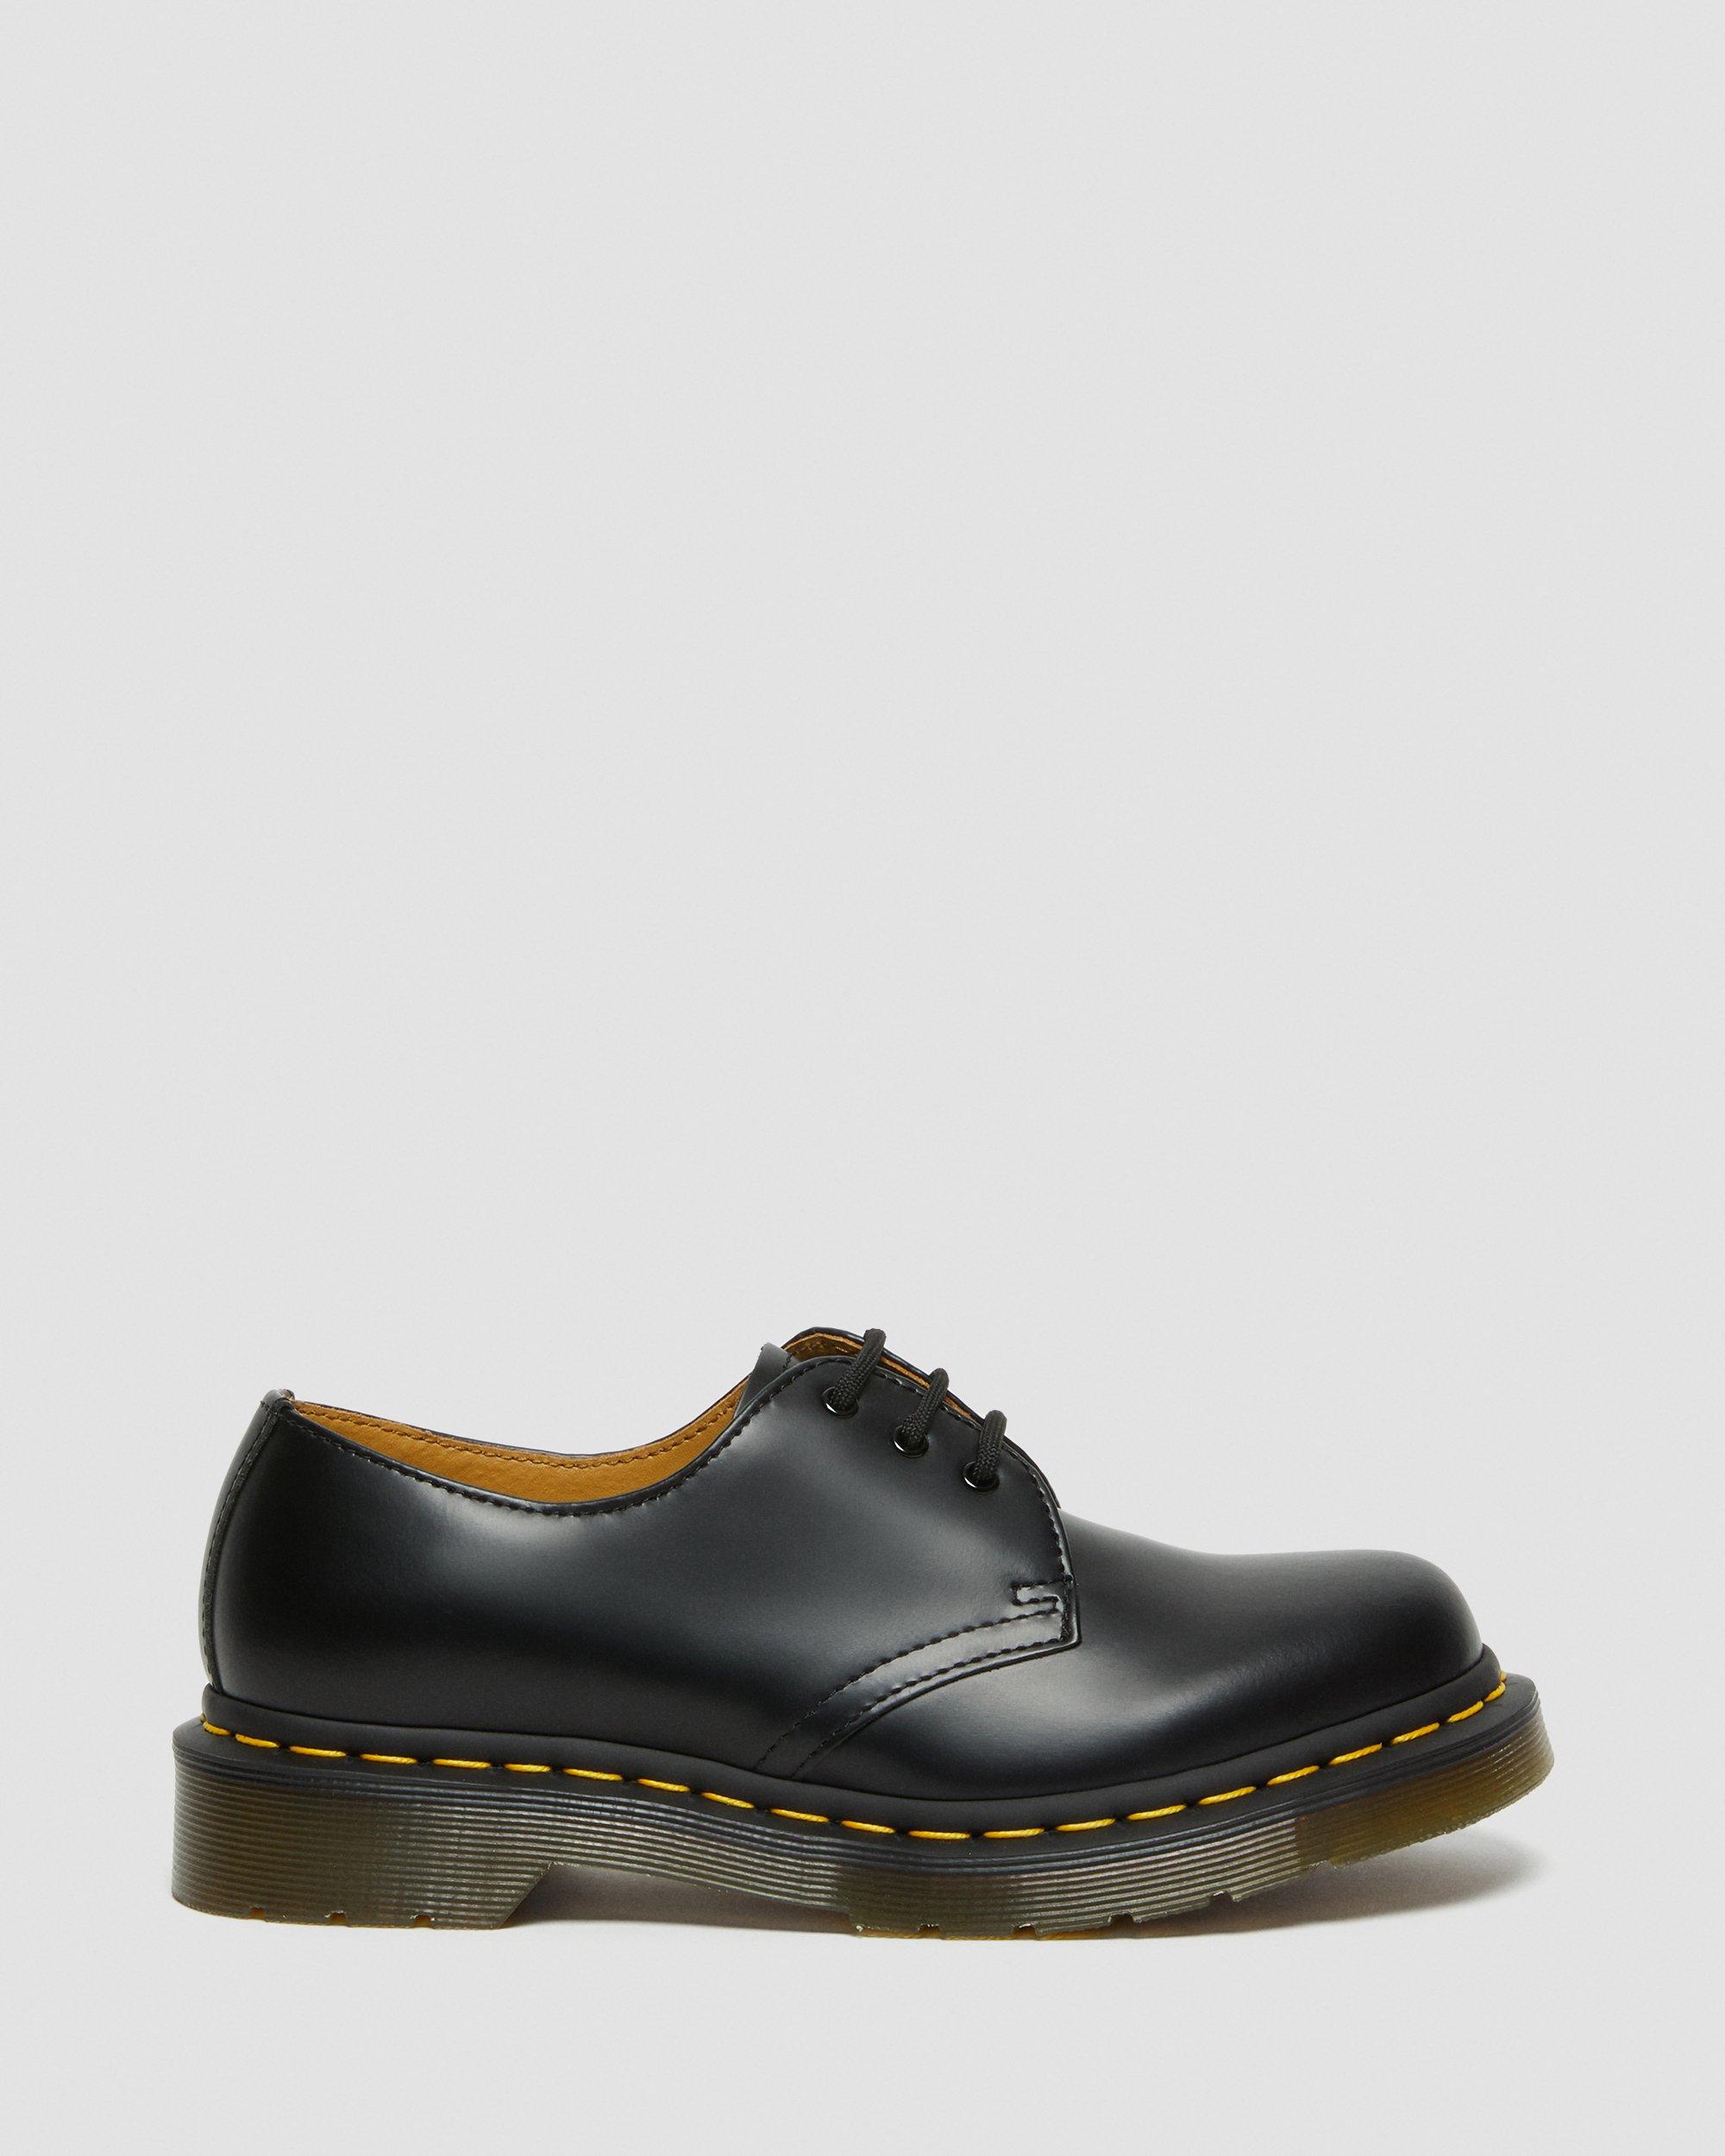 1461 Women's Smooth Leather Oxford Shoes in Black | Dr. Martens